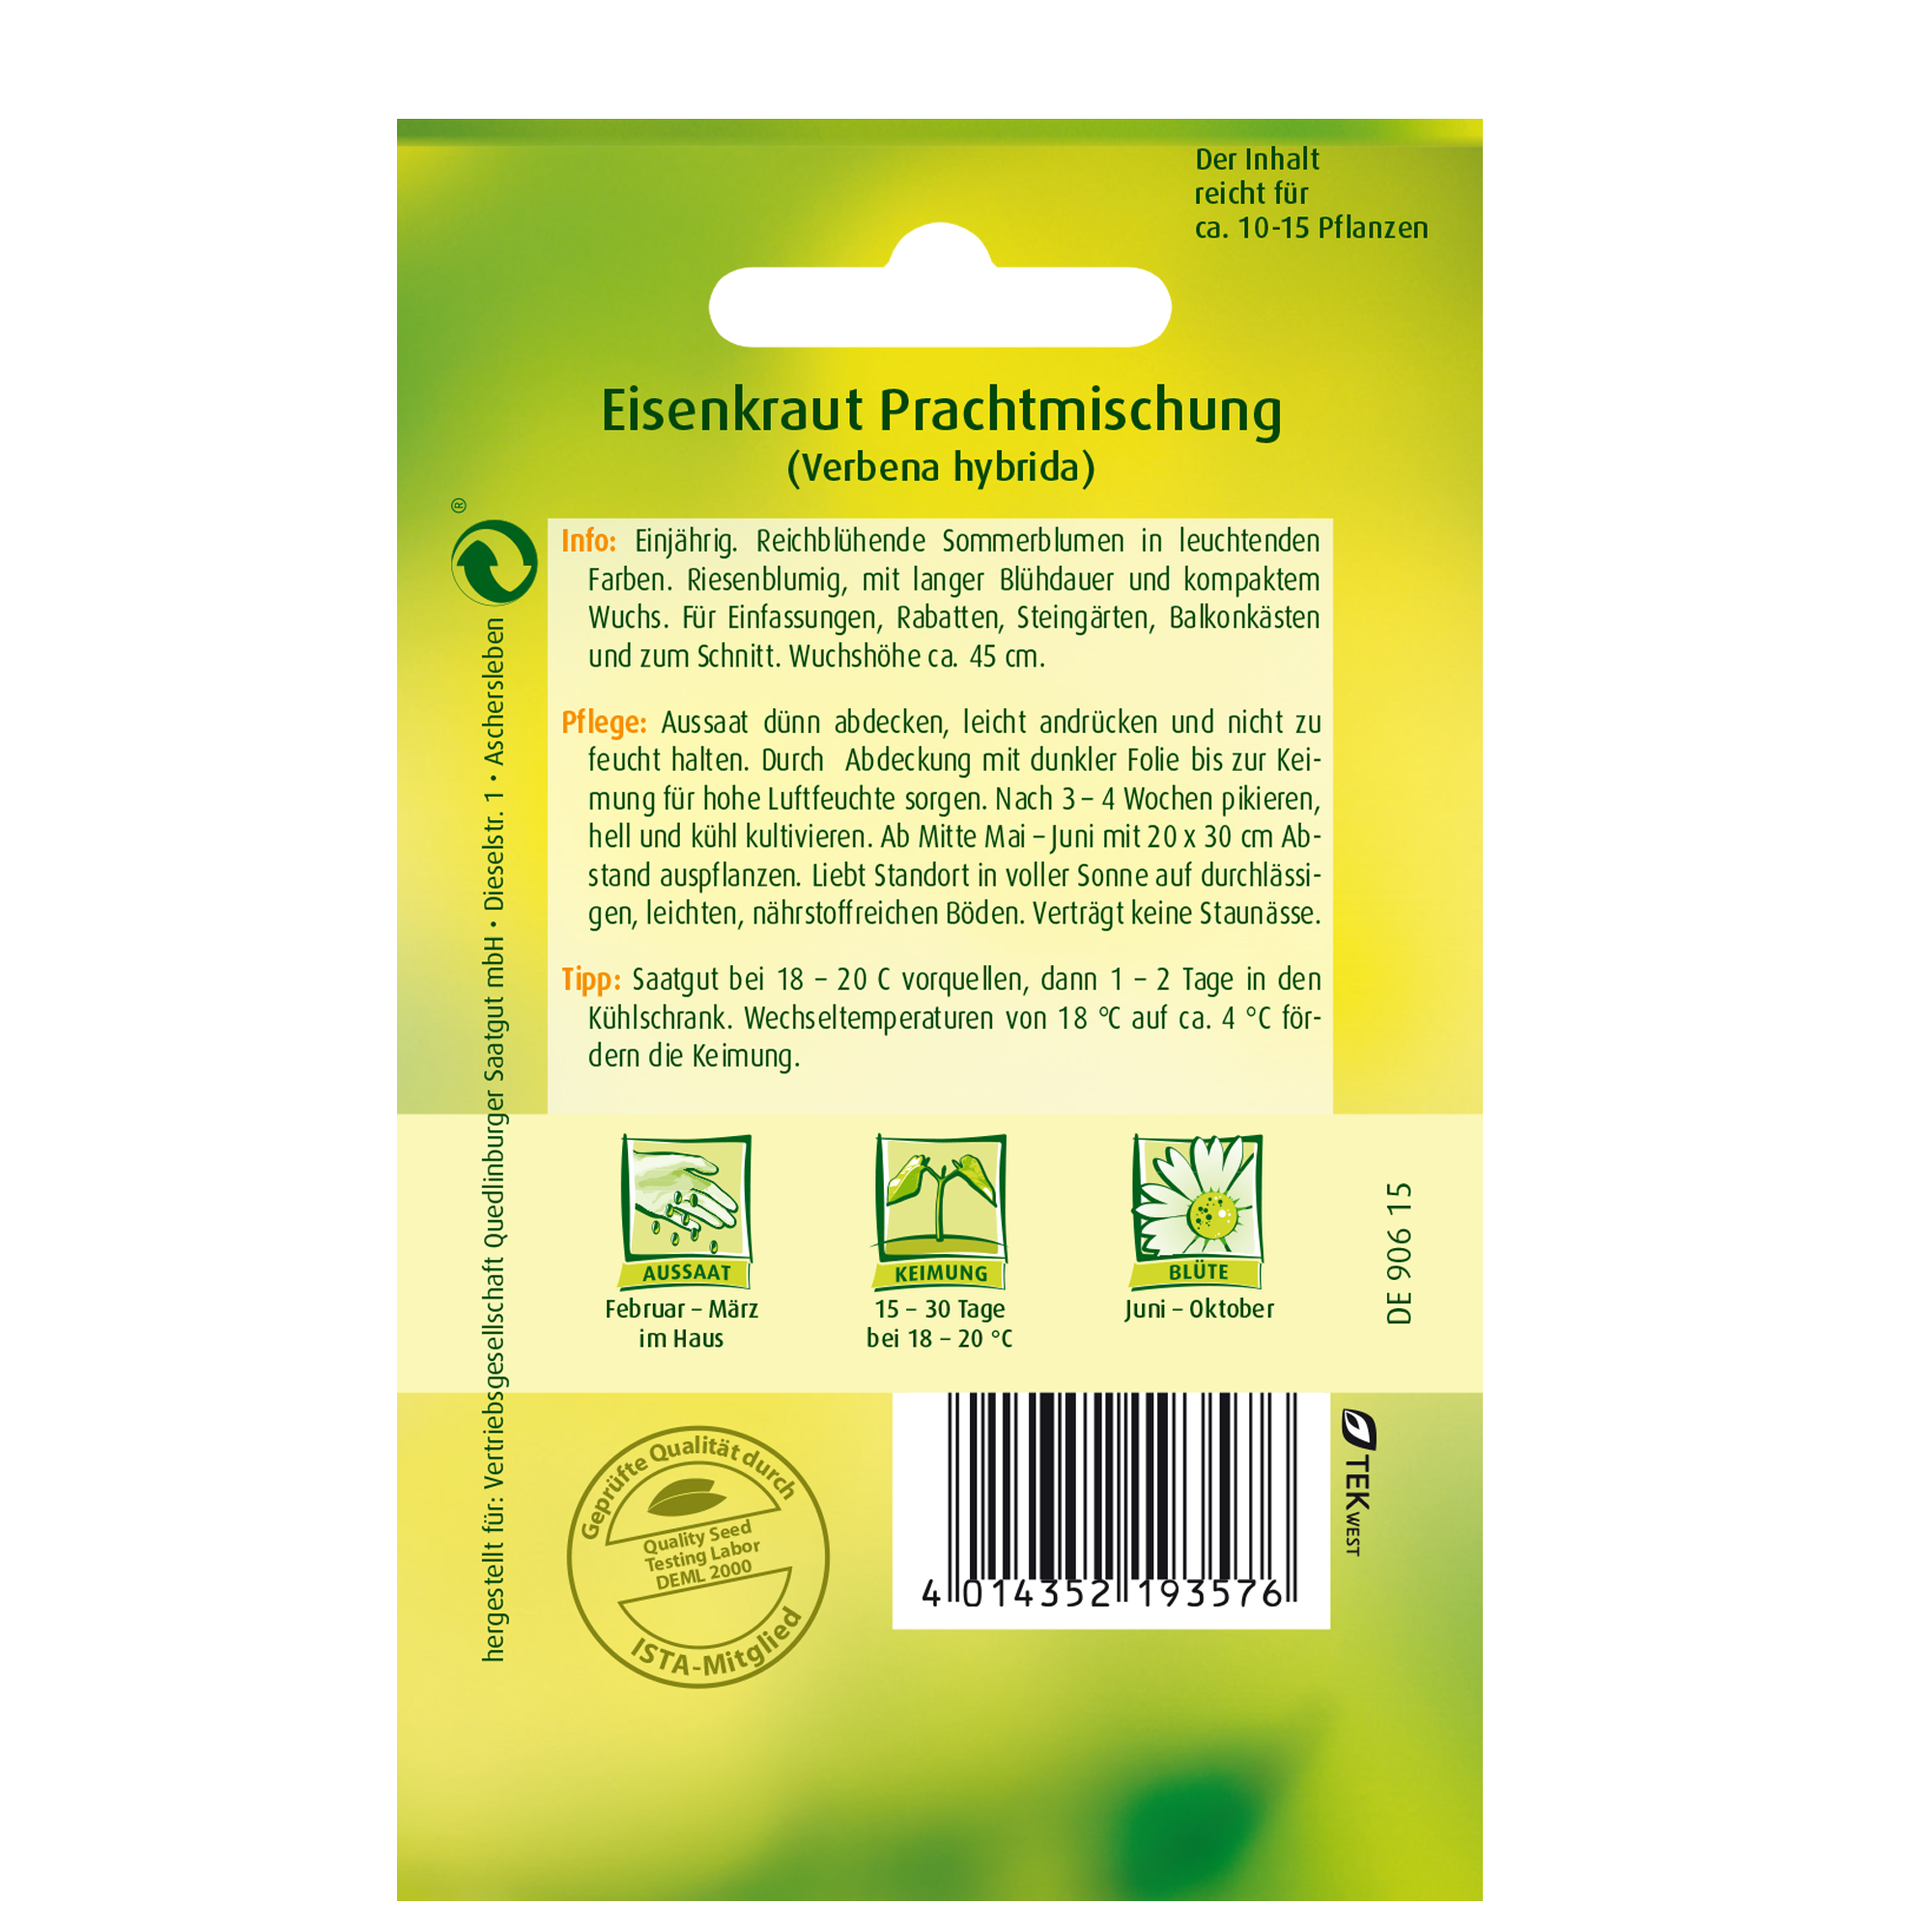 Eisenkraut 'Prachtmischung' + product picture